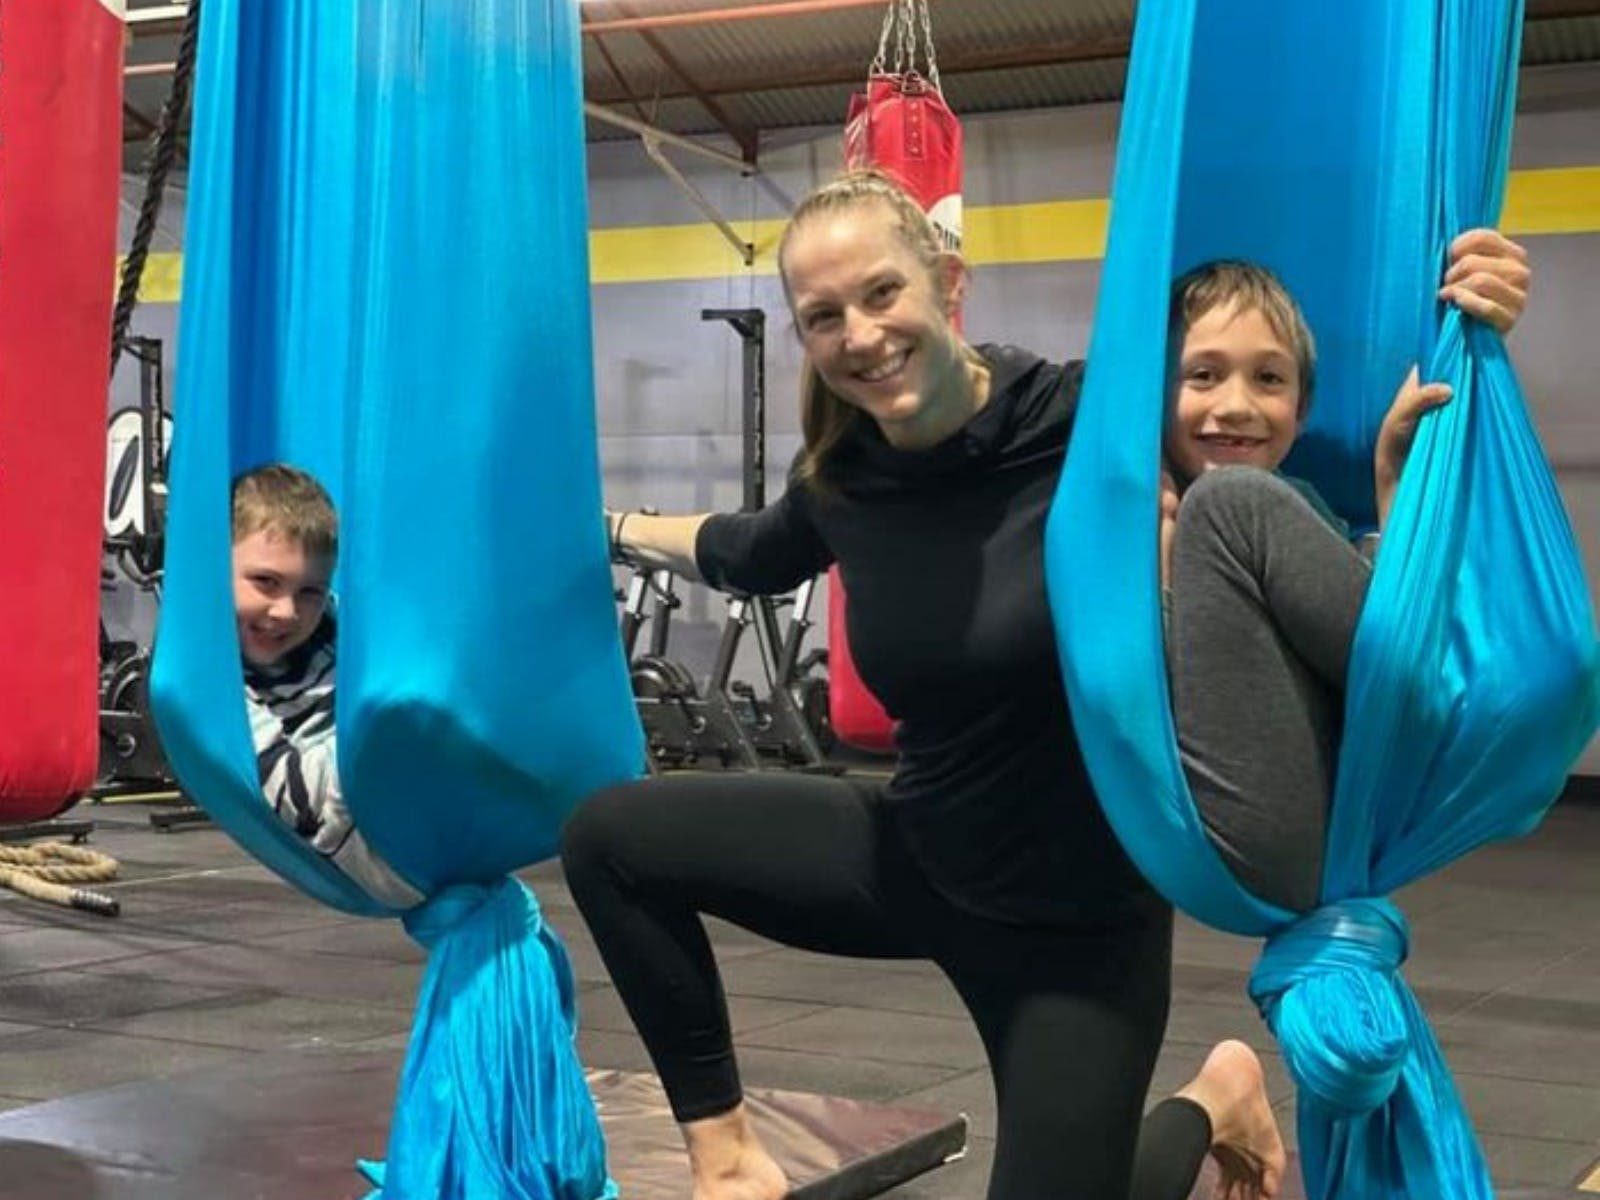 Two participants in blue silks aerial with instructor in-between